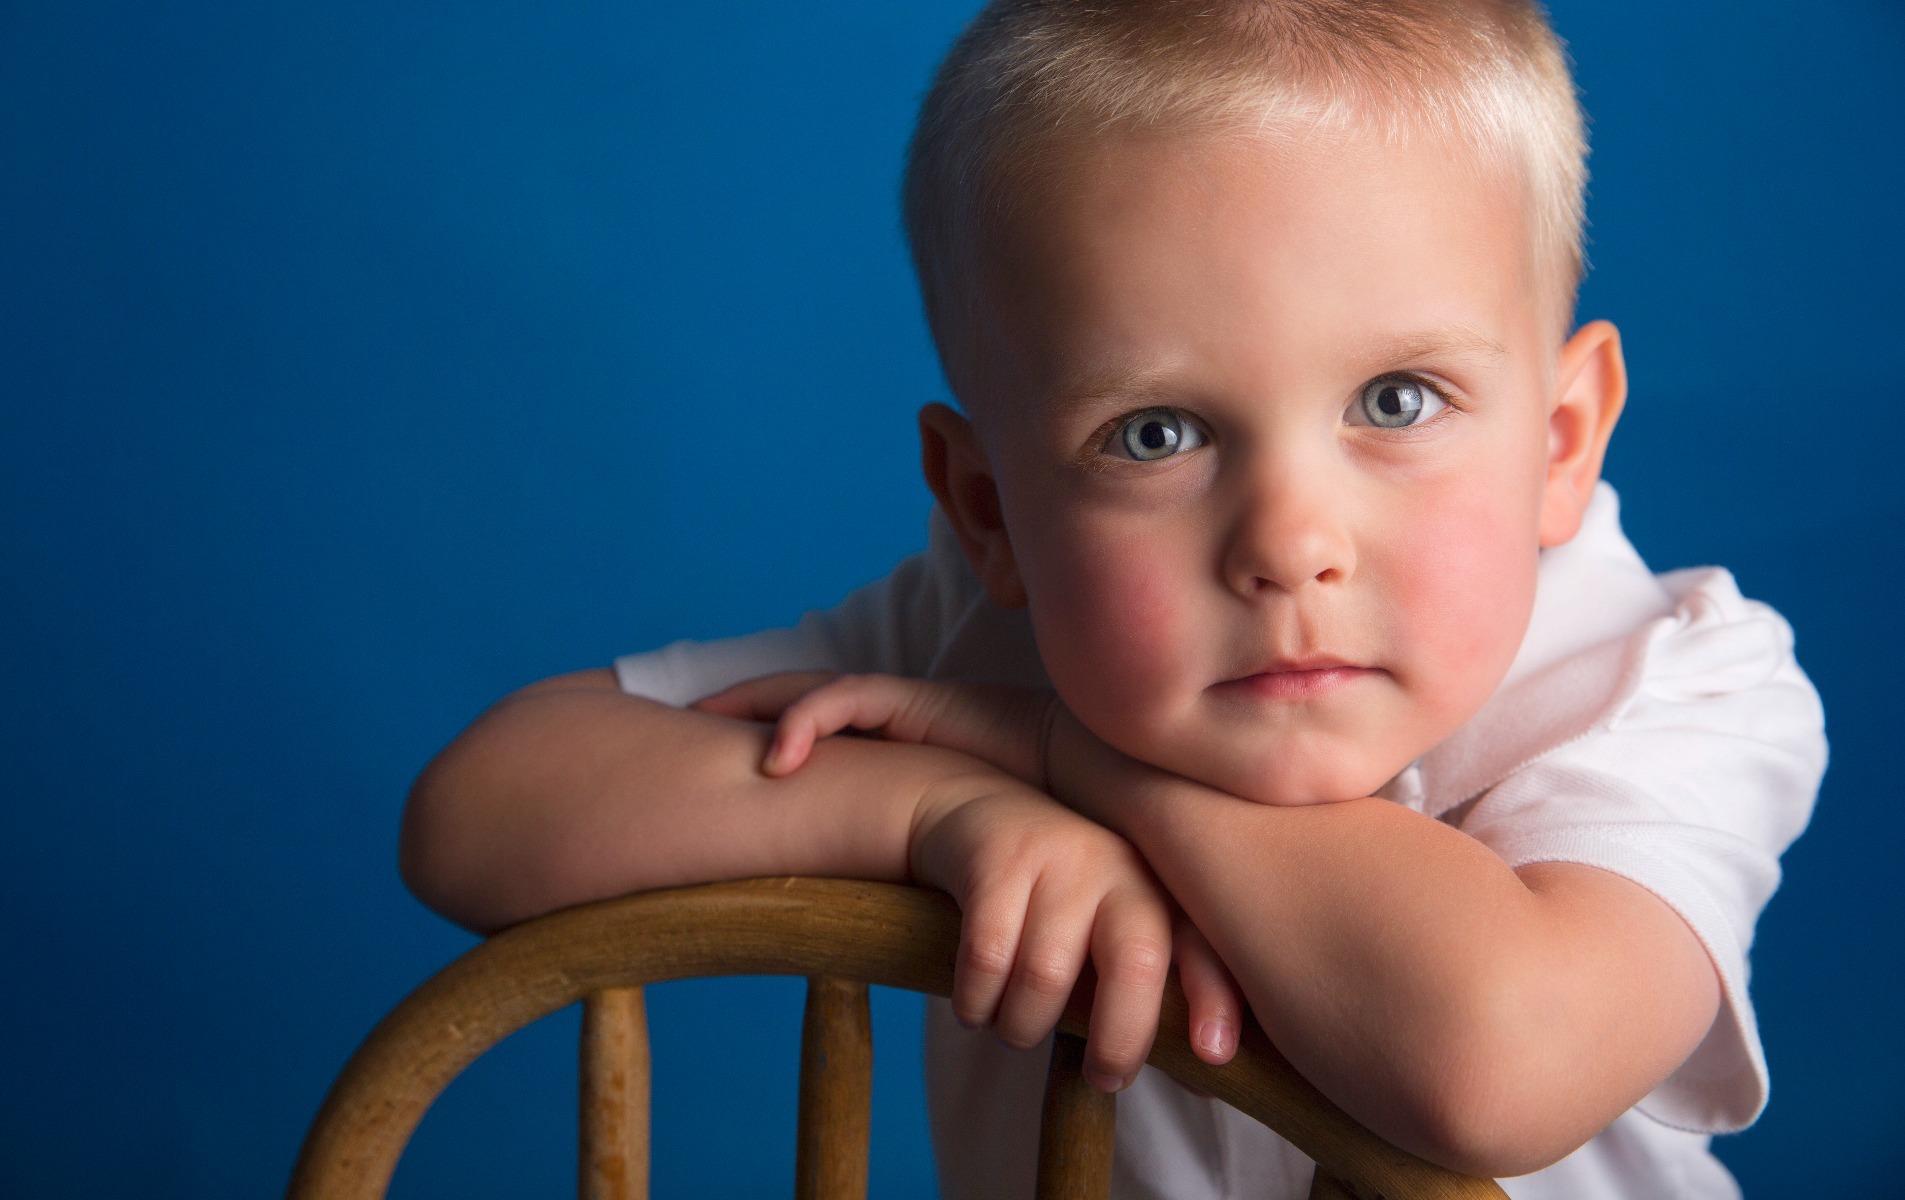 little boy with blue eyes poses in front of a blue background